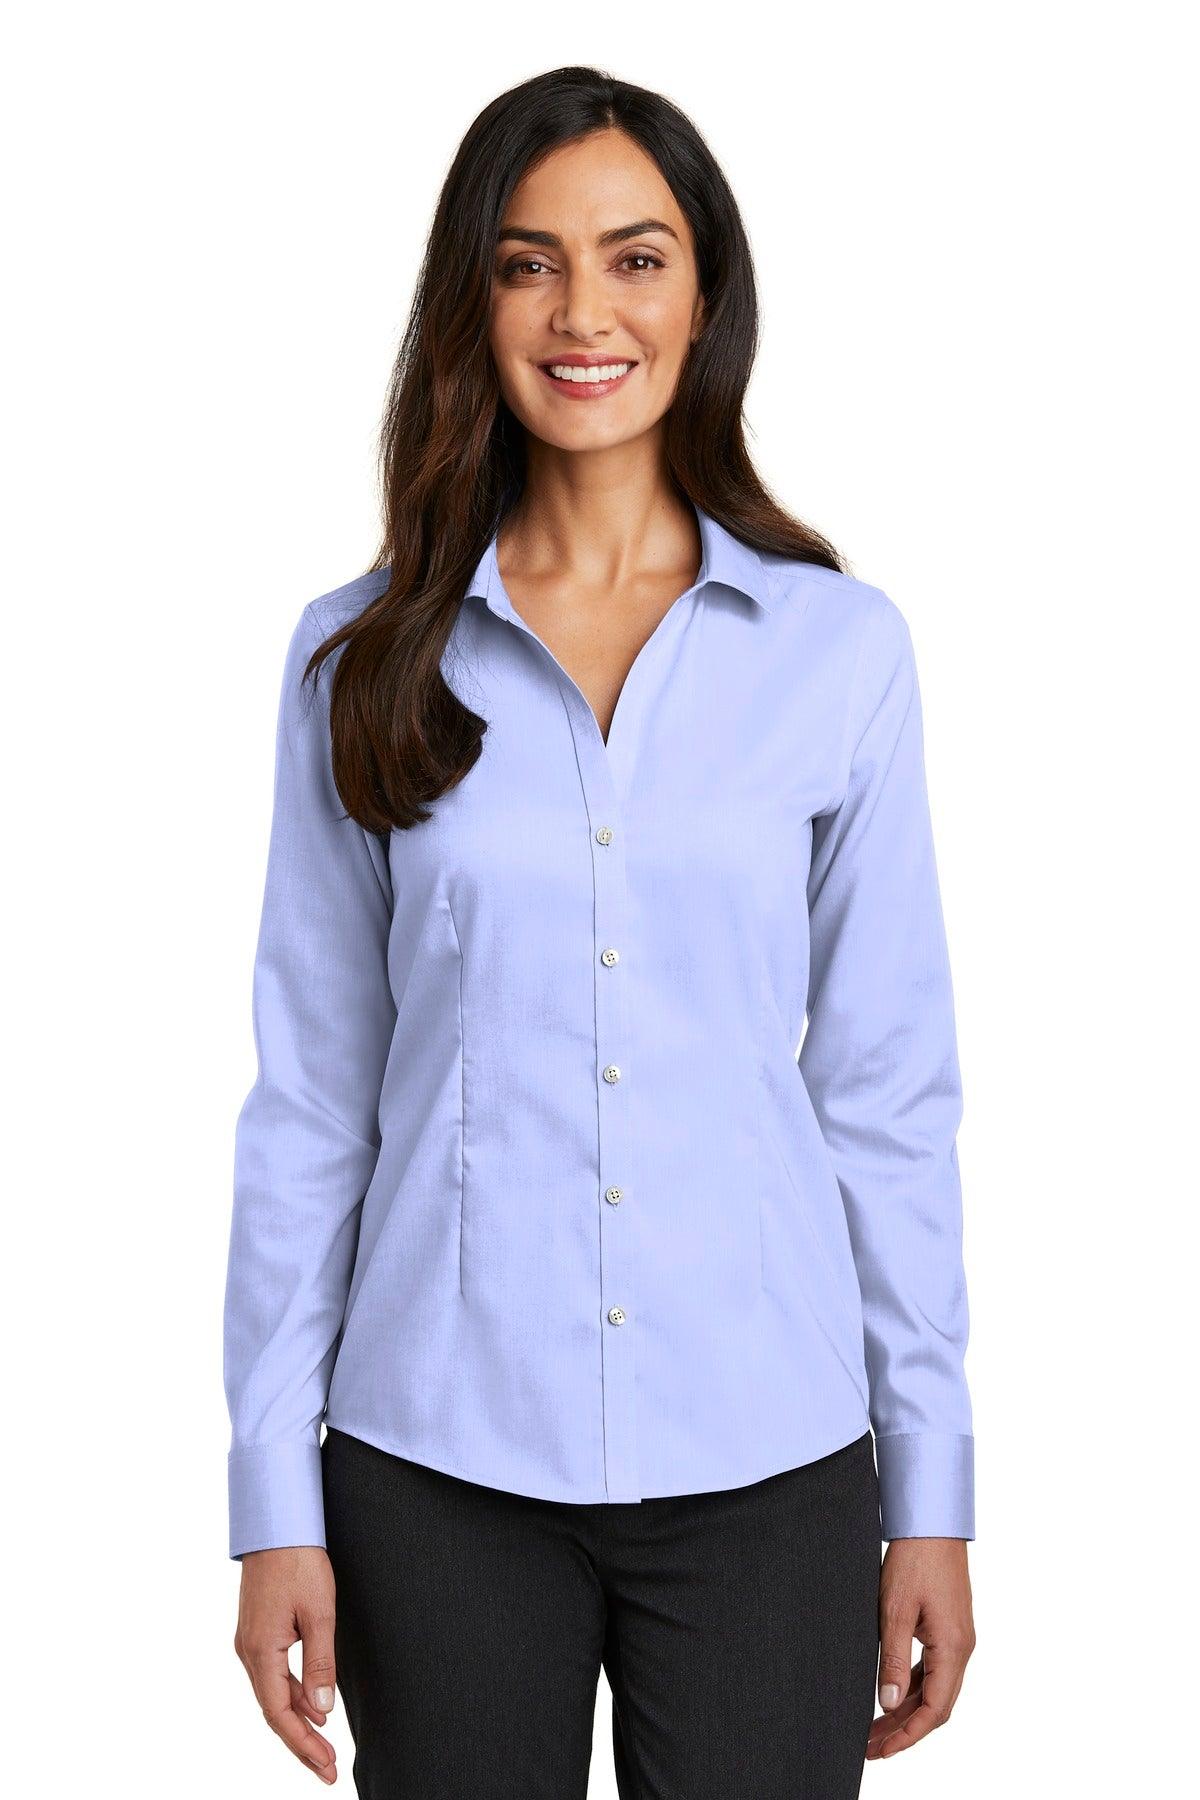 Red House Ladies Pinpoint Oxford Non-Iron Shirt. RH250 - Dresses Max